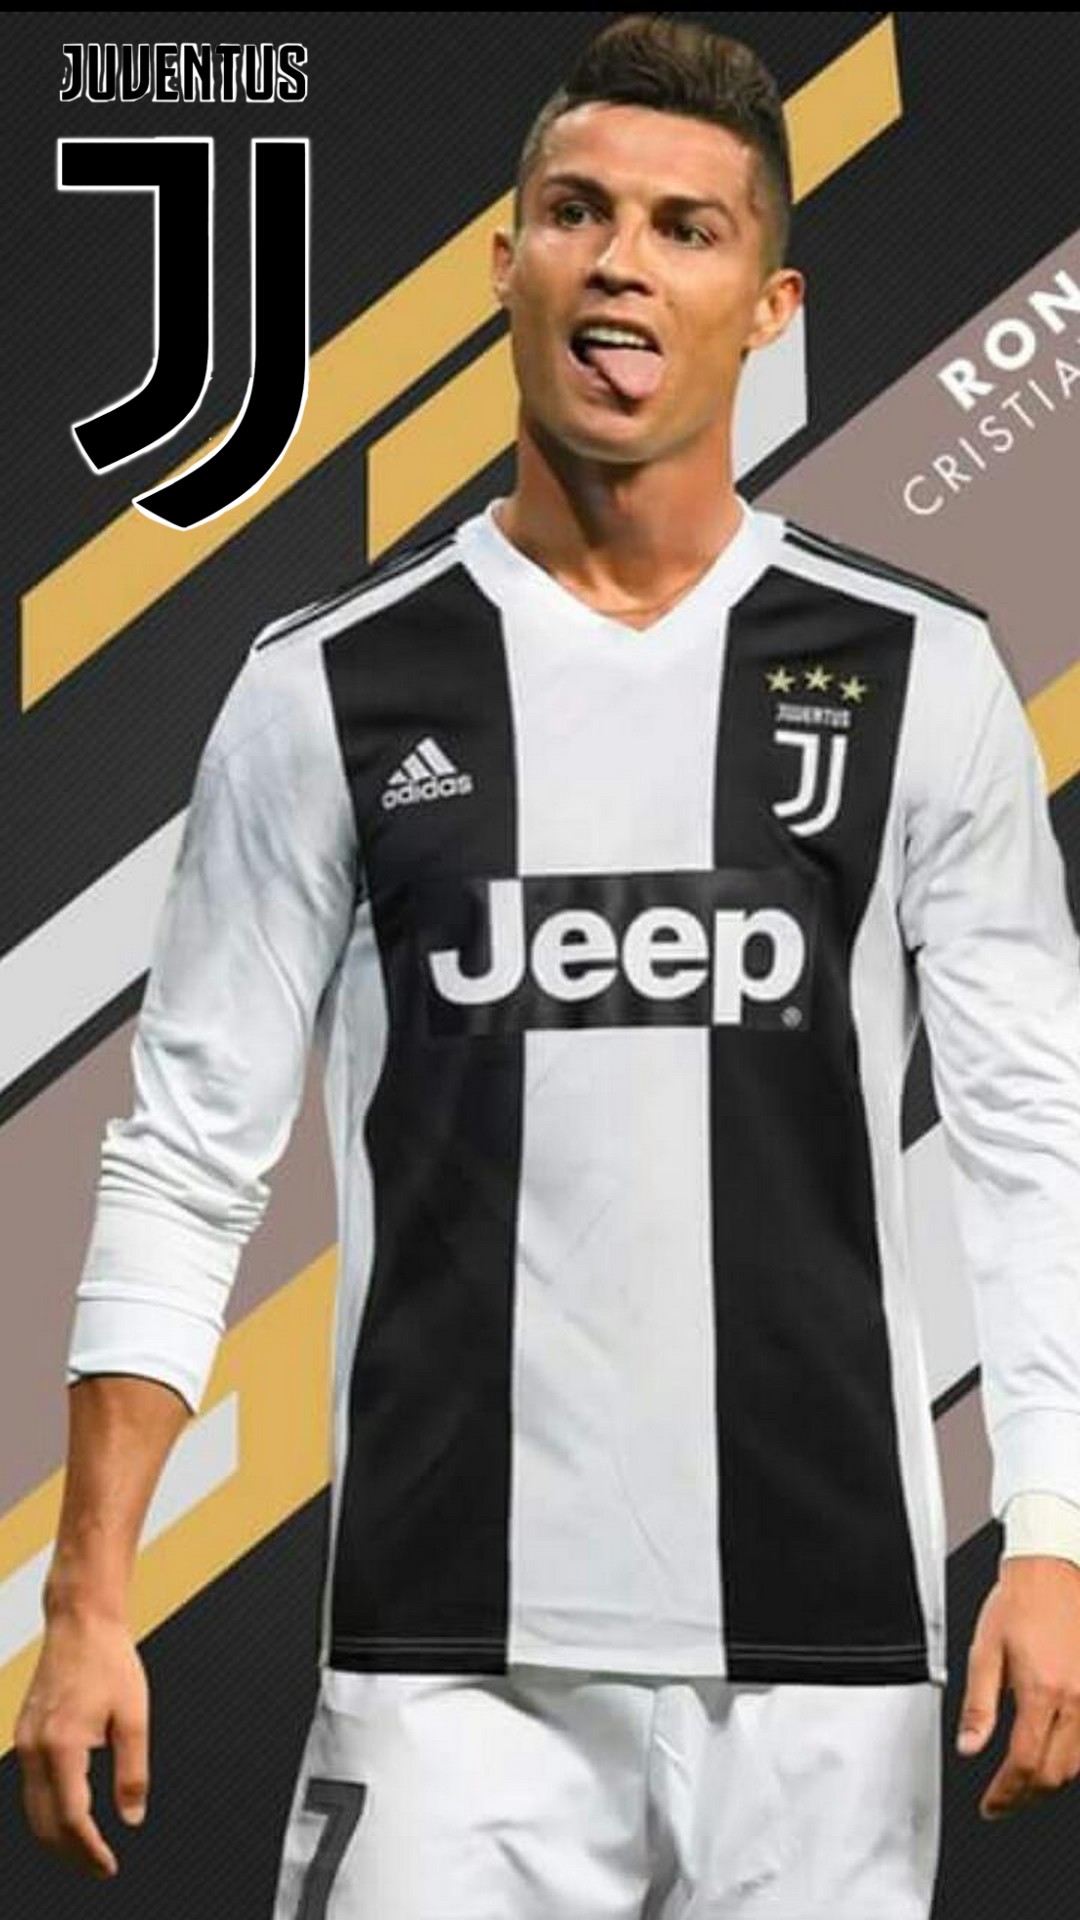 Cristiano Ronaldo Juventus Wallpaper For Mobile With Resolution 1080X1920 pixel. You can make this wallpaper for your Mac or Windows Desktop Background, iPhone, Android or Tablet and another Smartphone device for free